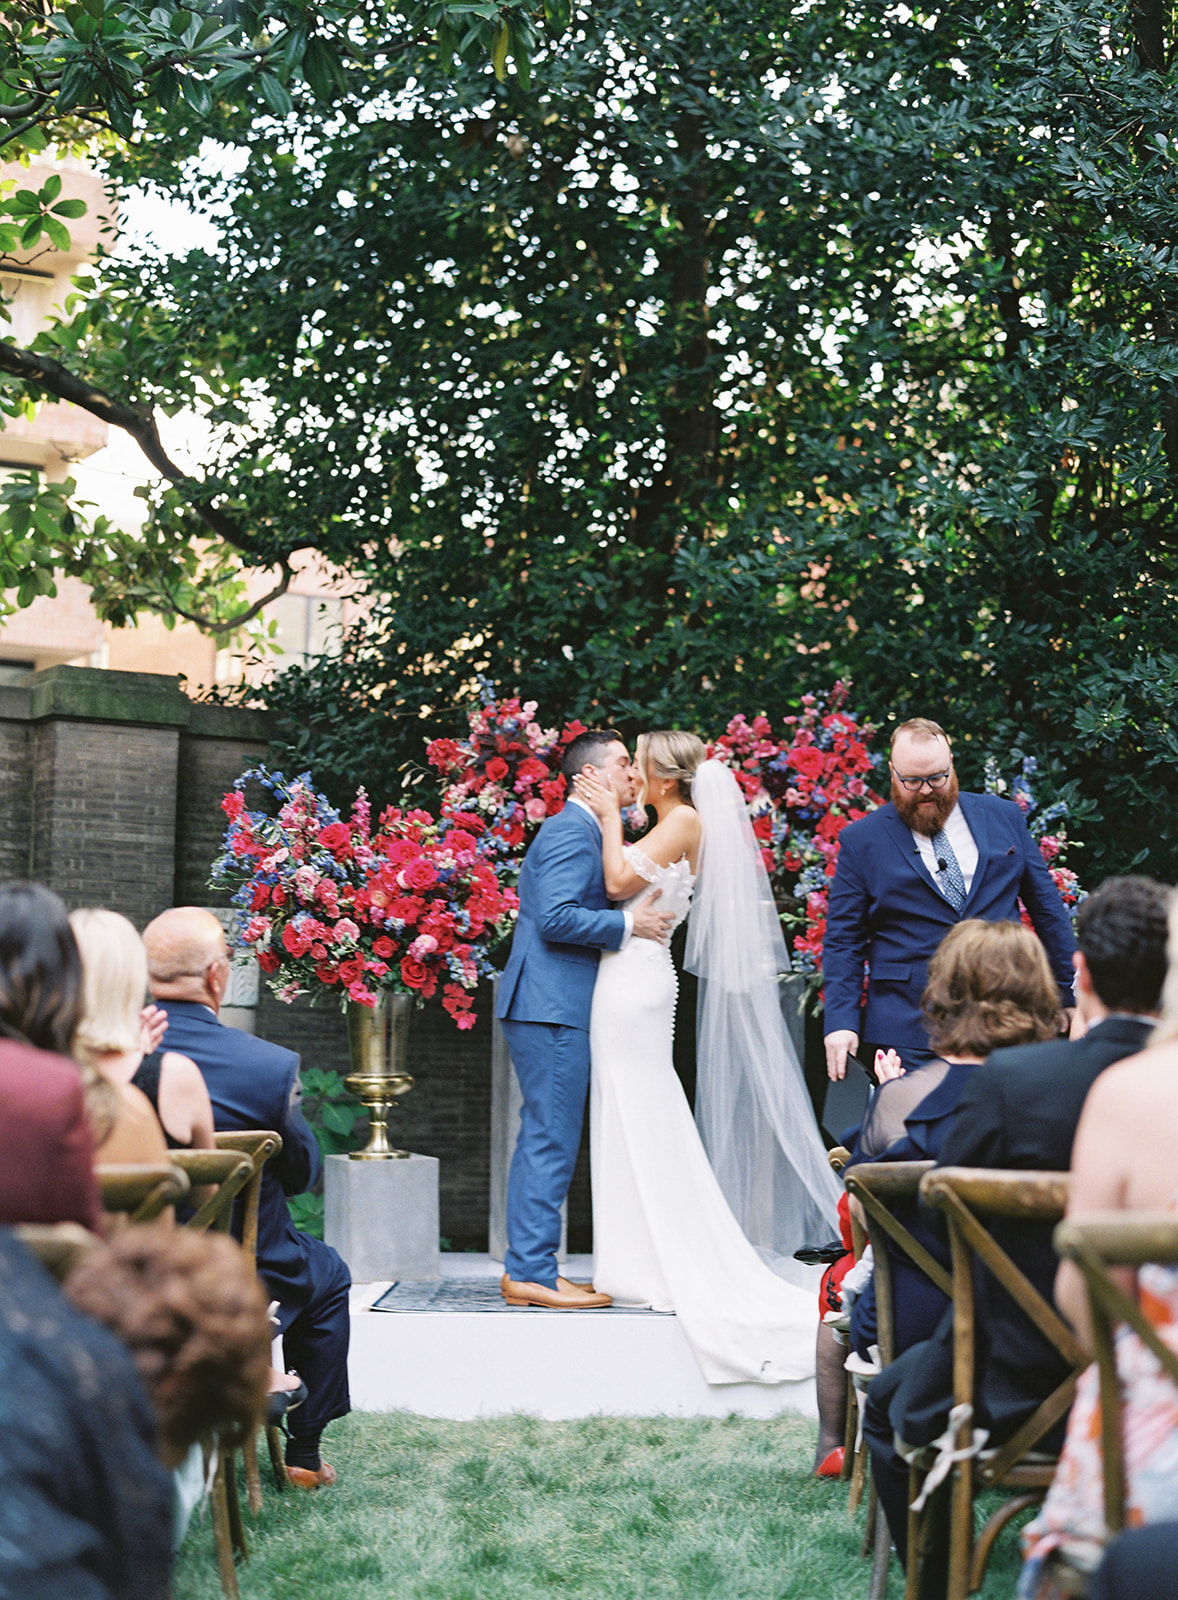 OUTDOOR WEDDING CEREMONY AT LARZ ANDERSON HOUSE